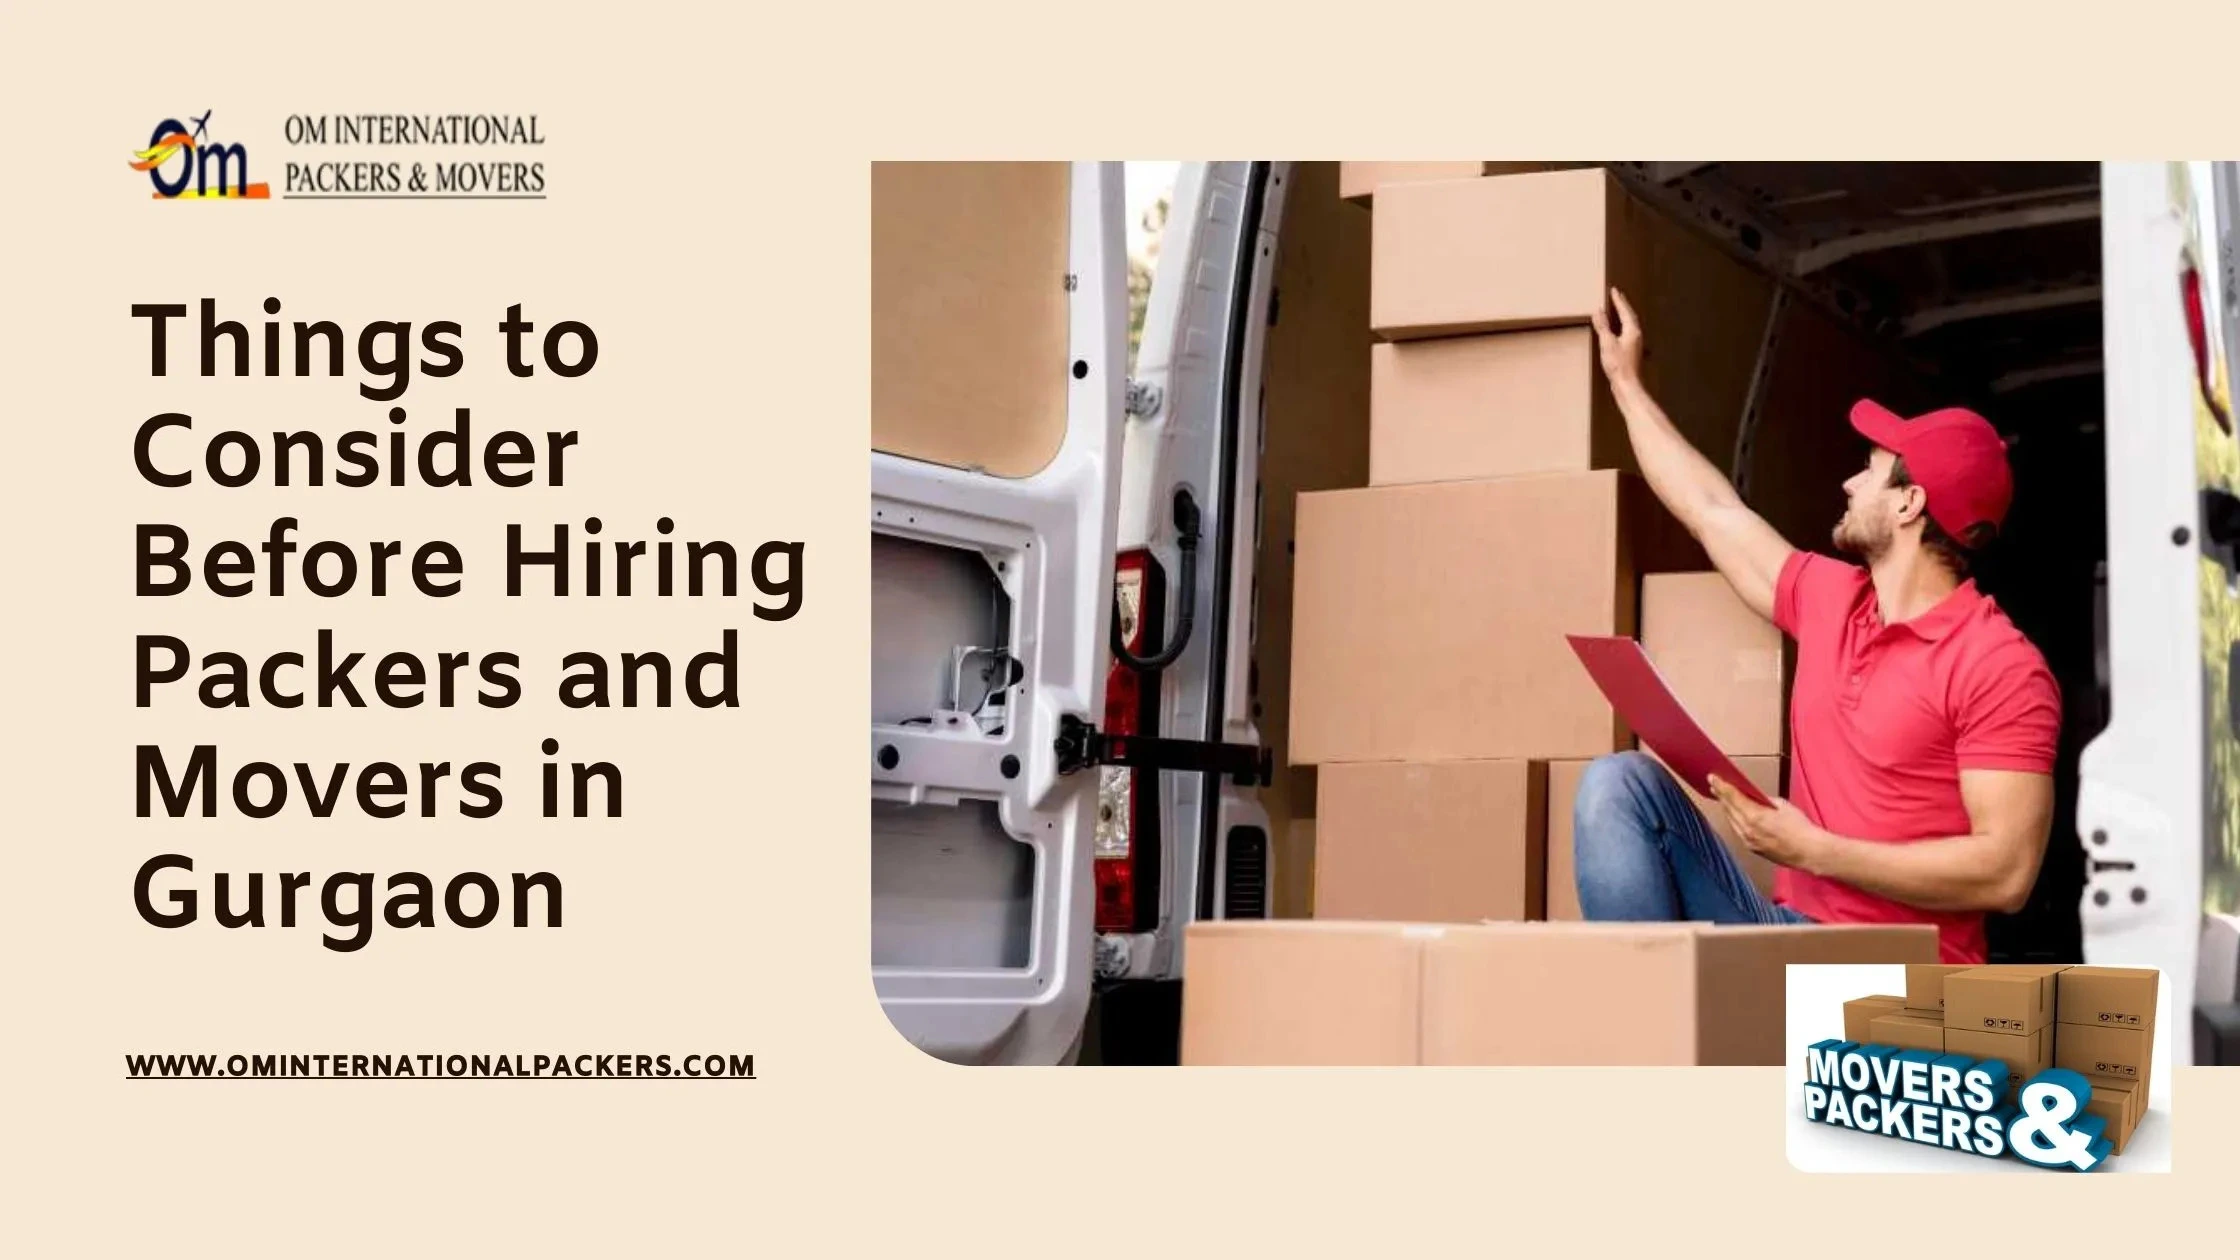 Things to Consider Before Hiring Packers and Movers in Gurgaon